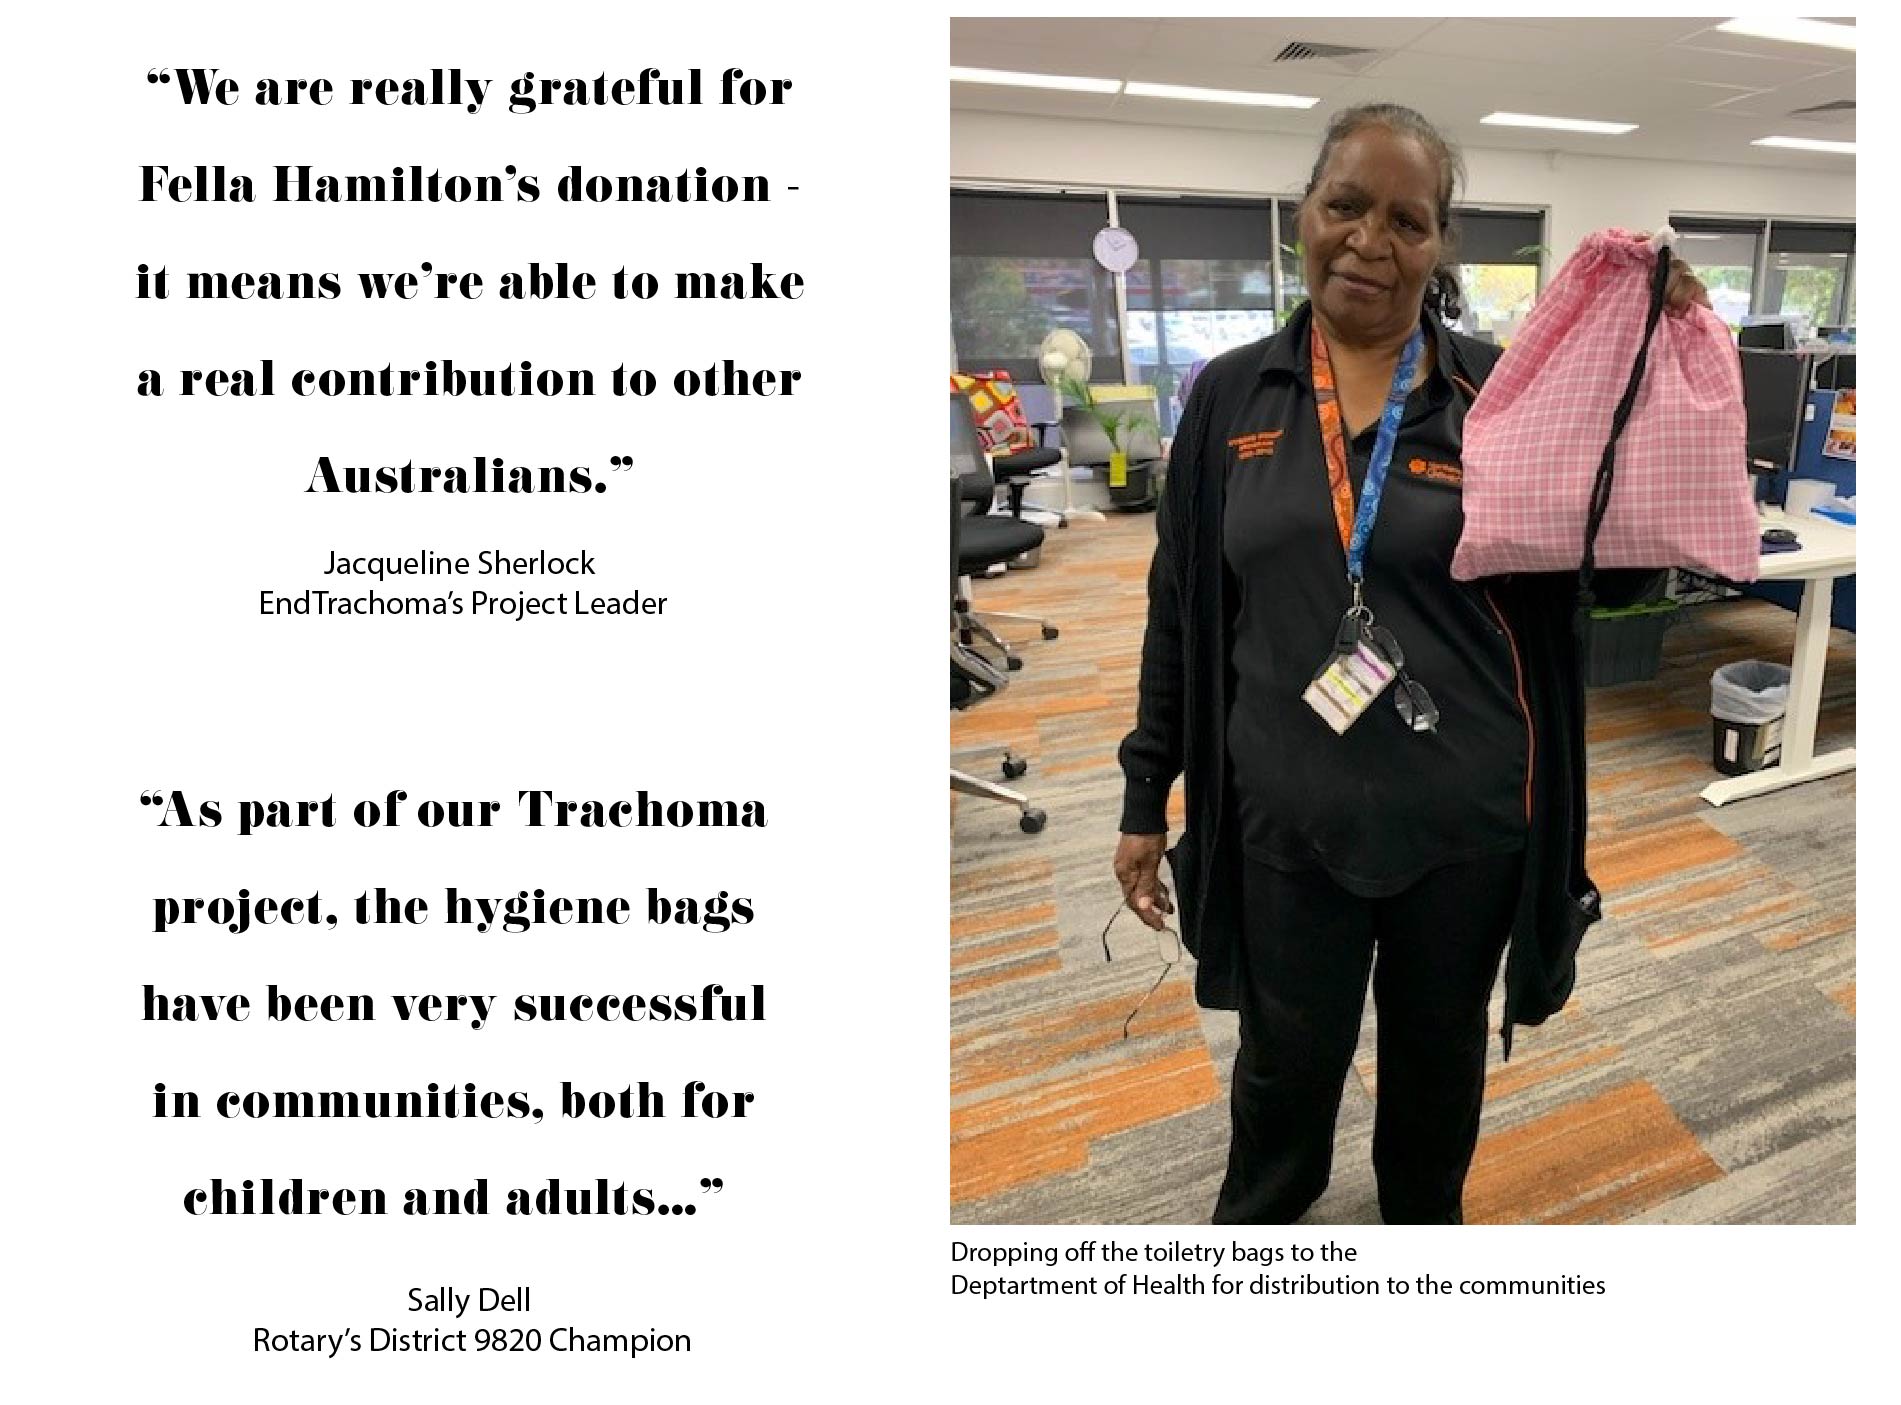 quotes from rotary club members & bags being distributed